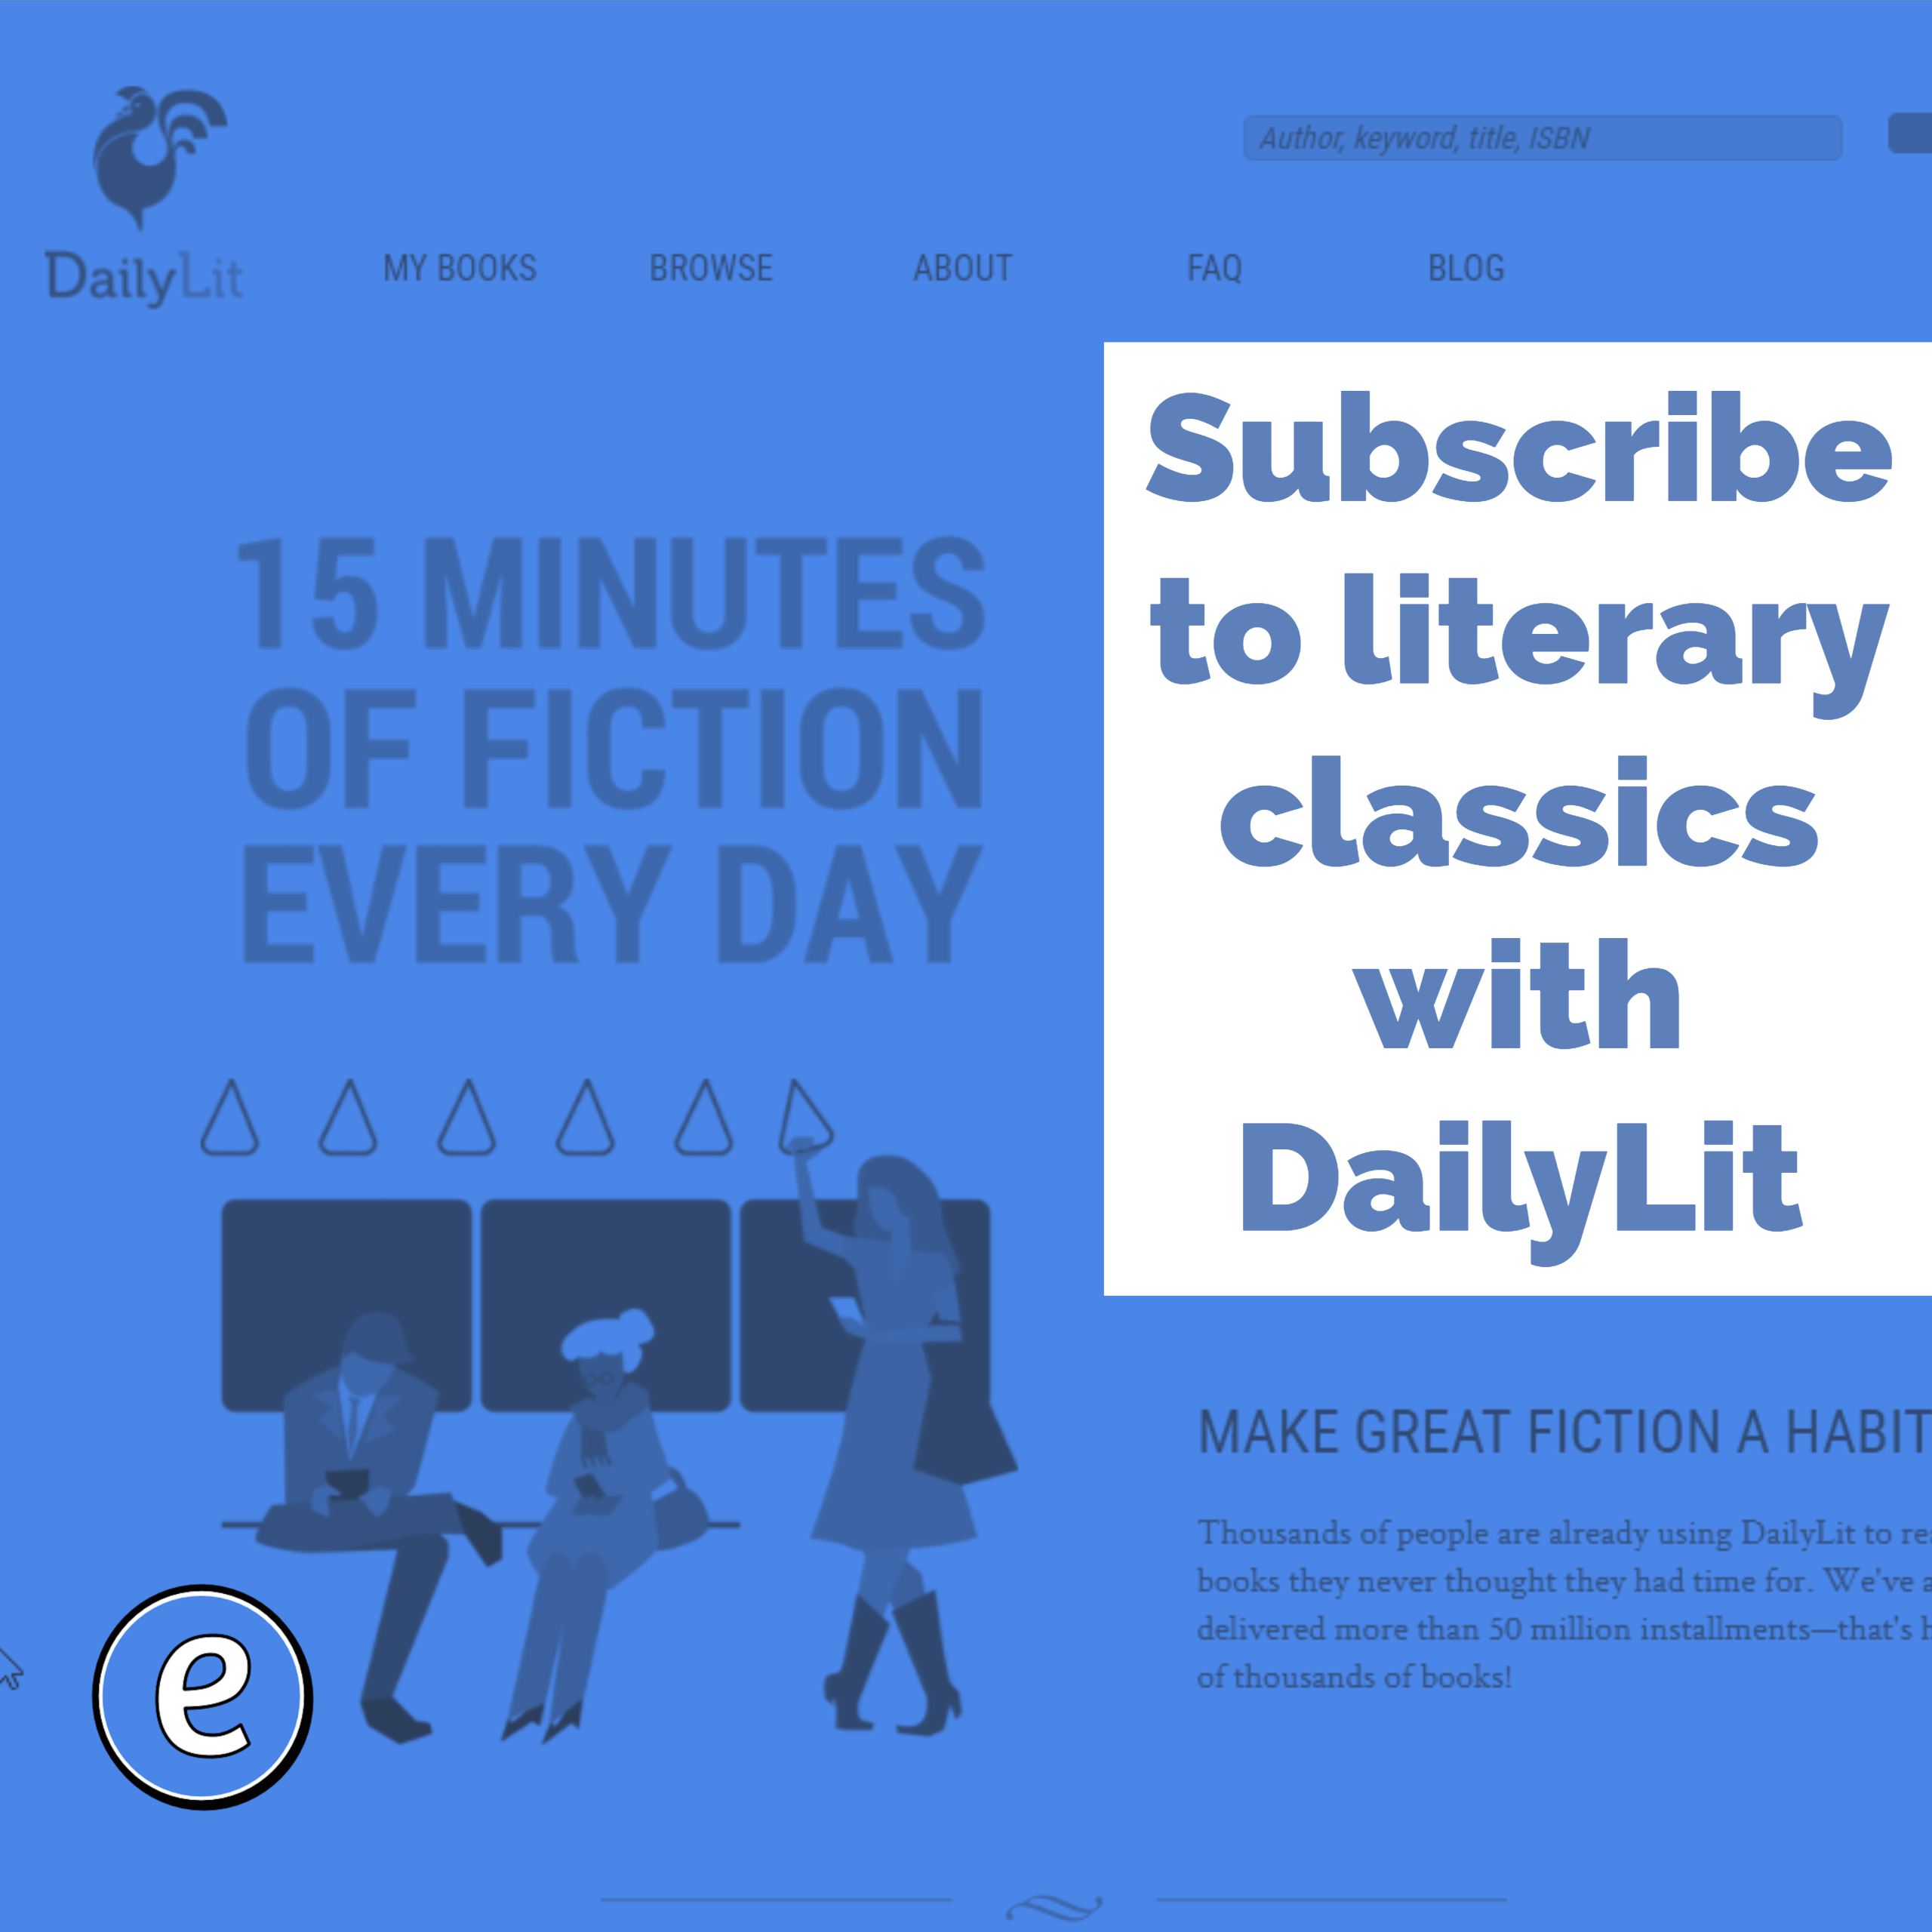 Subscribe to literary classics with DailyLit